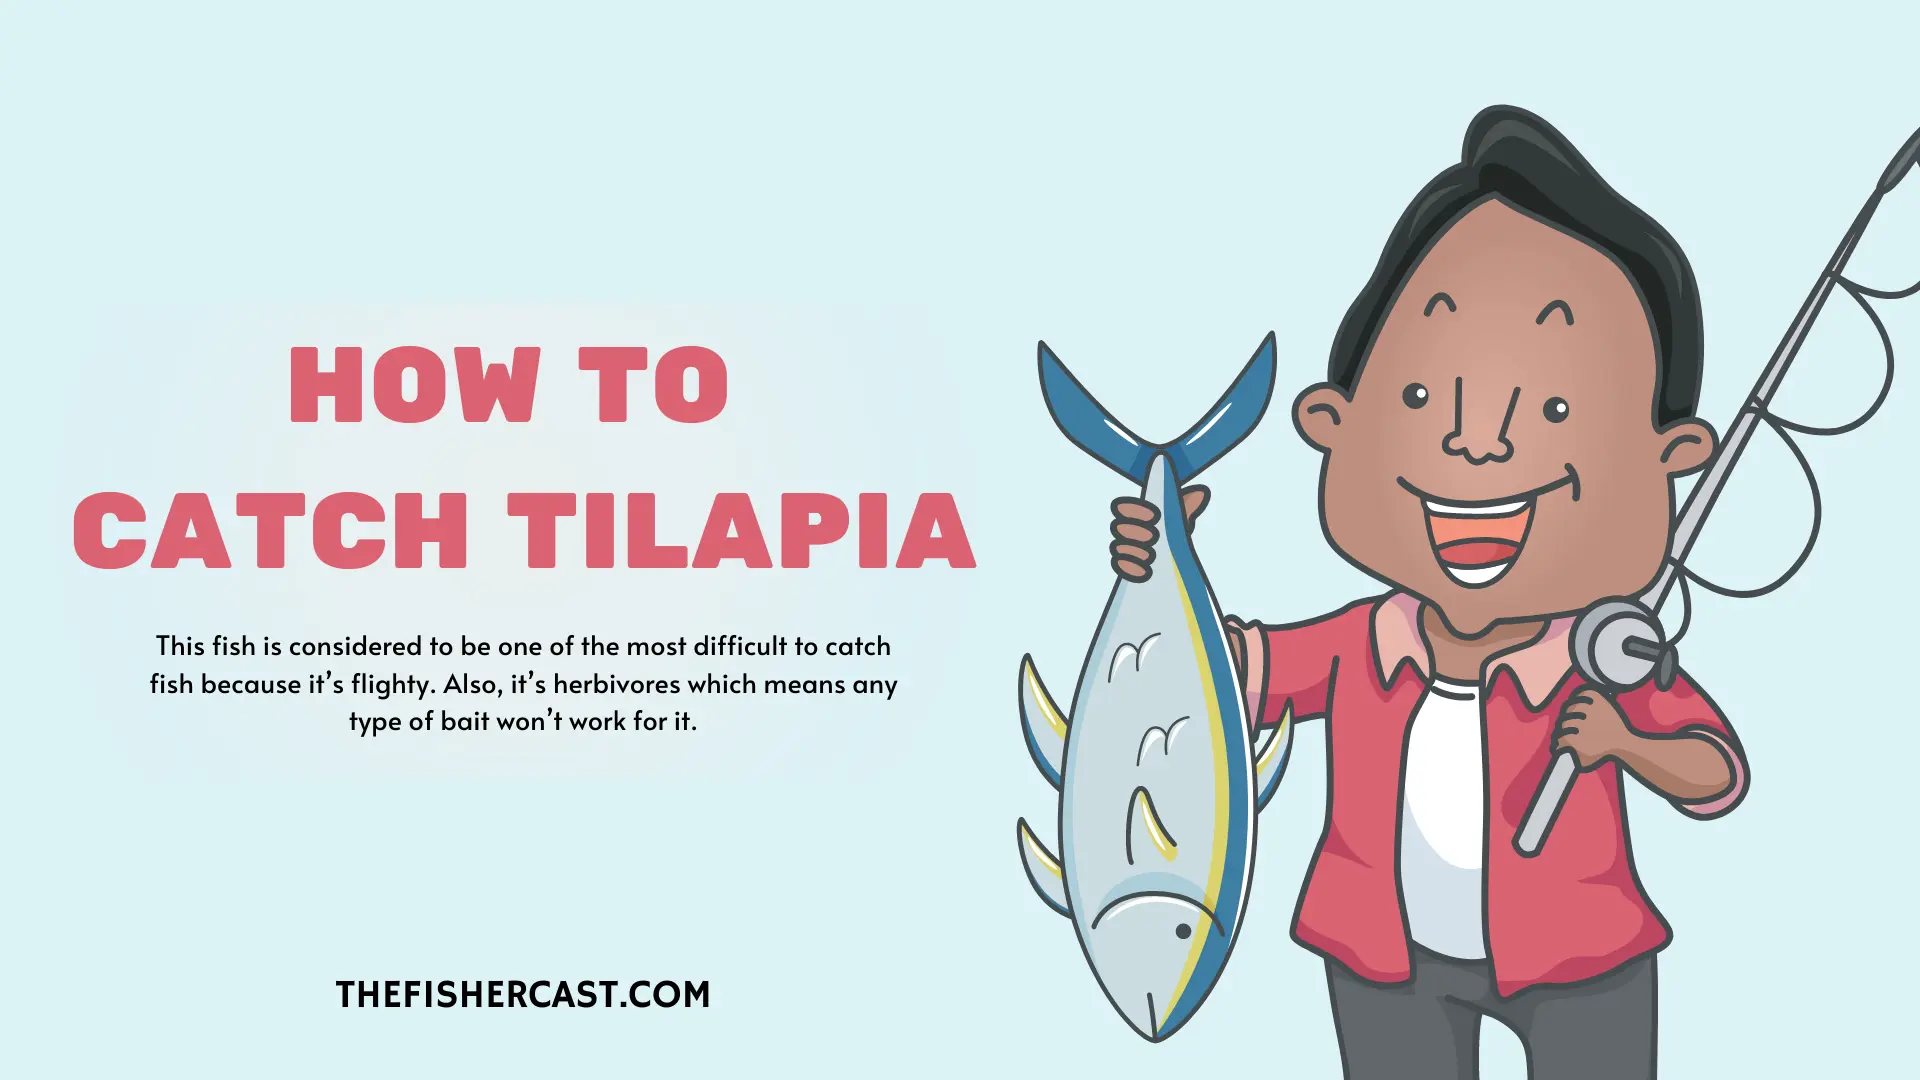 How to Catch Tilapia